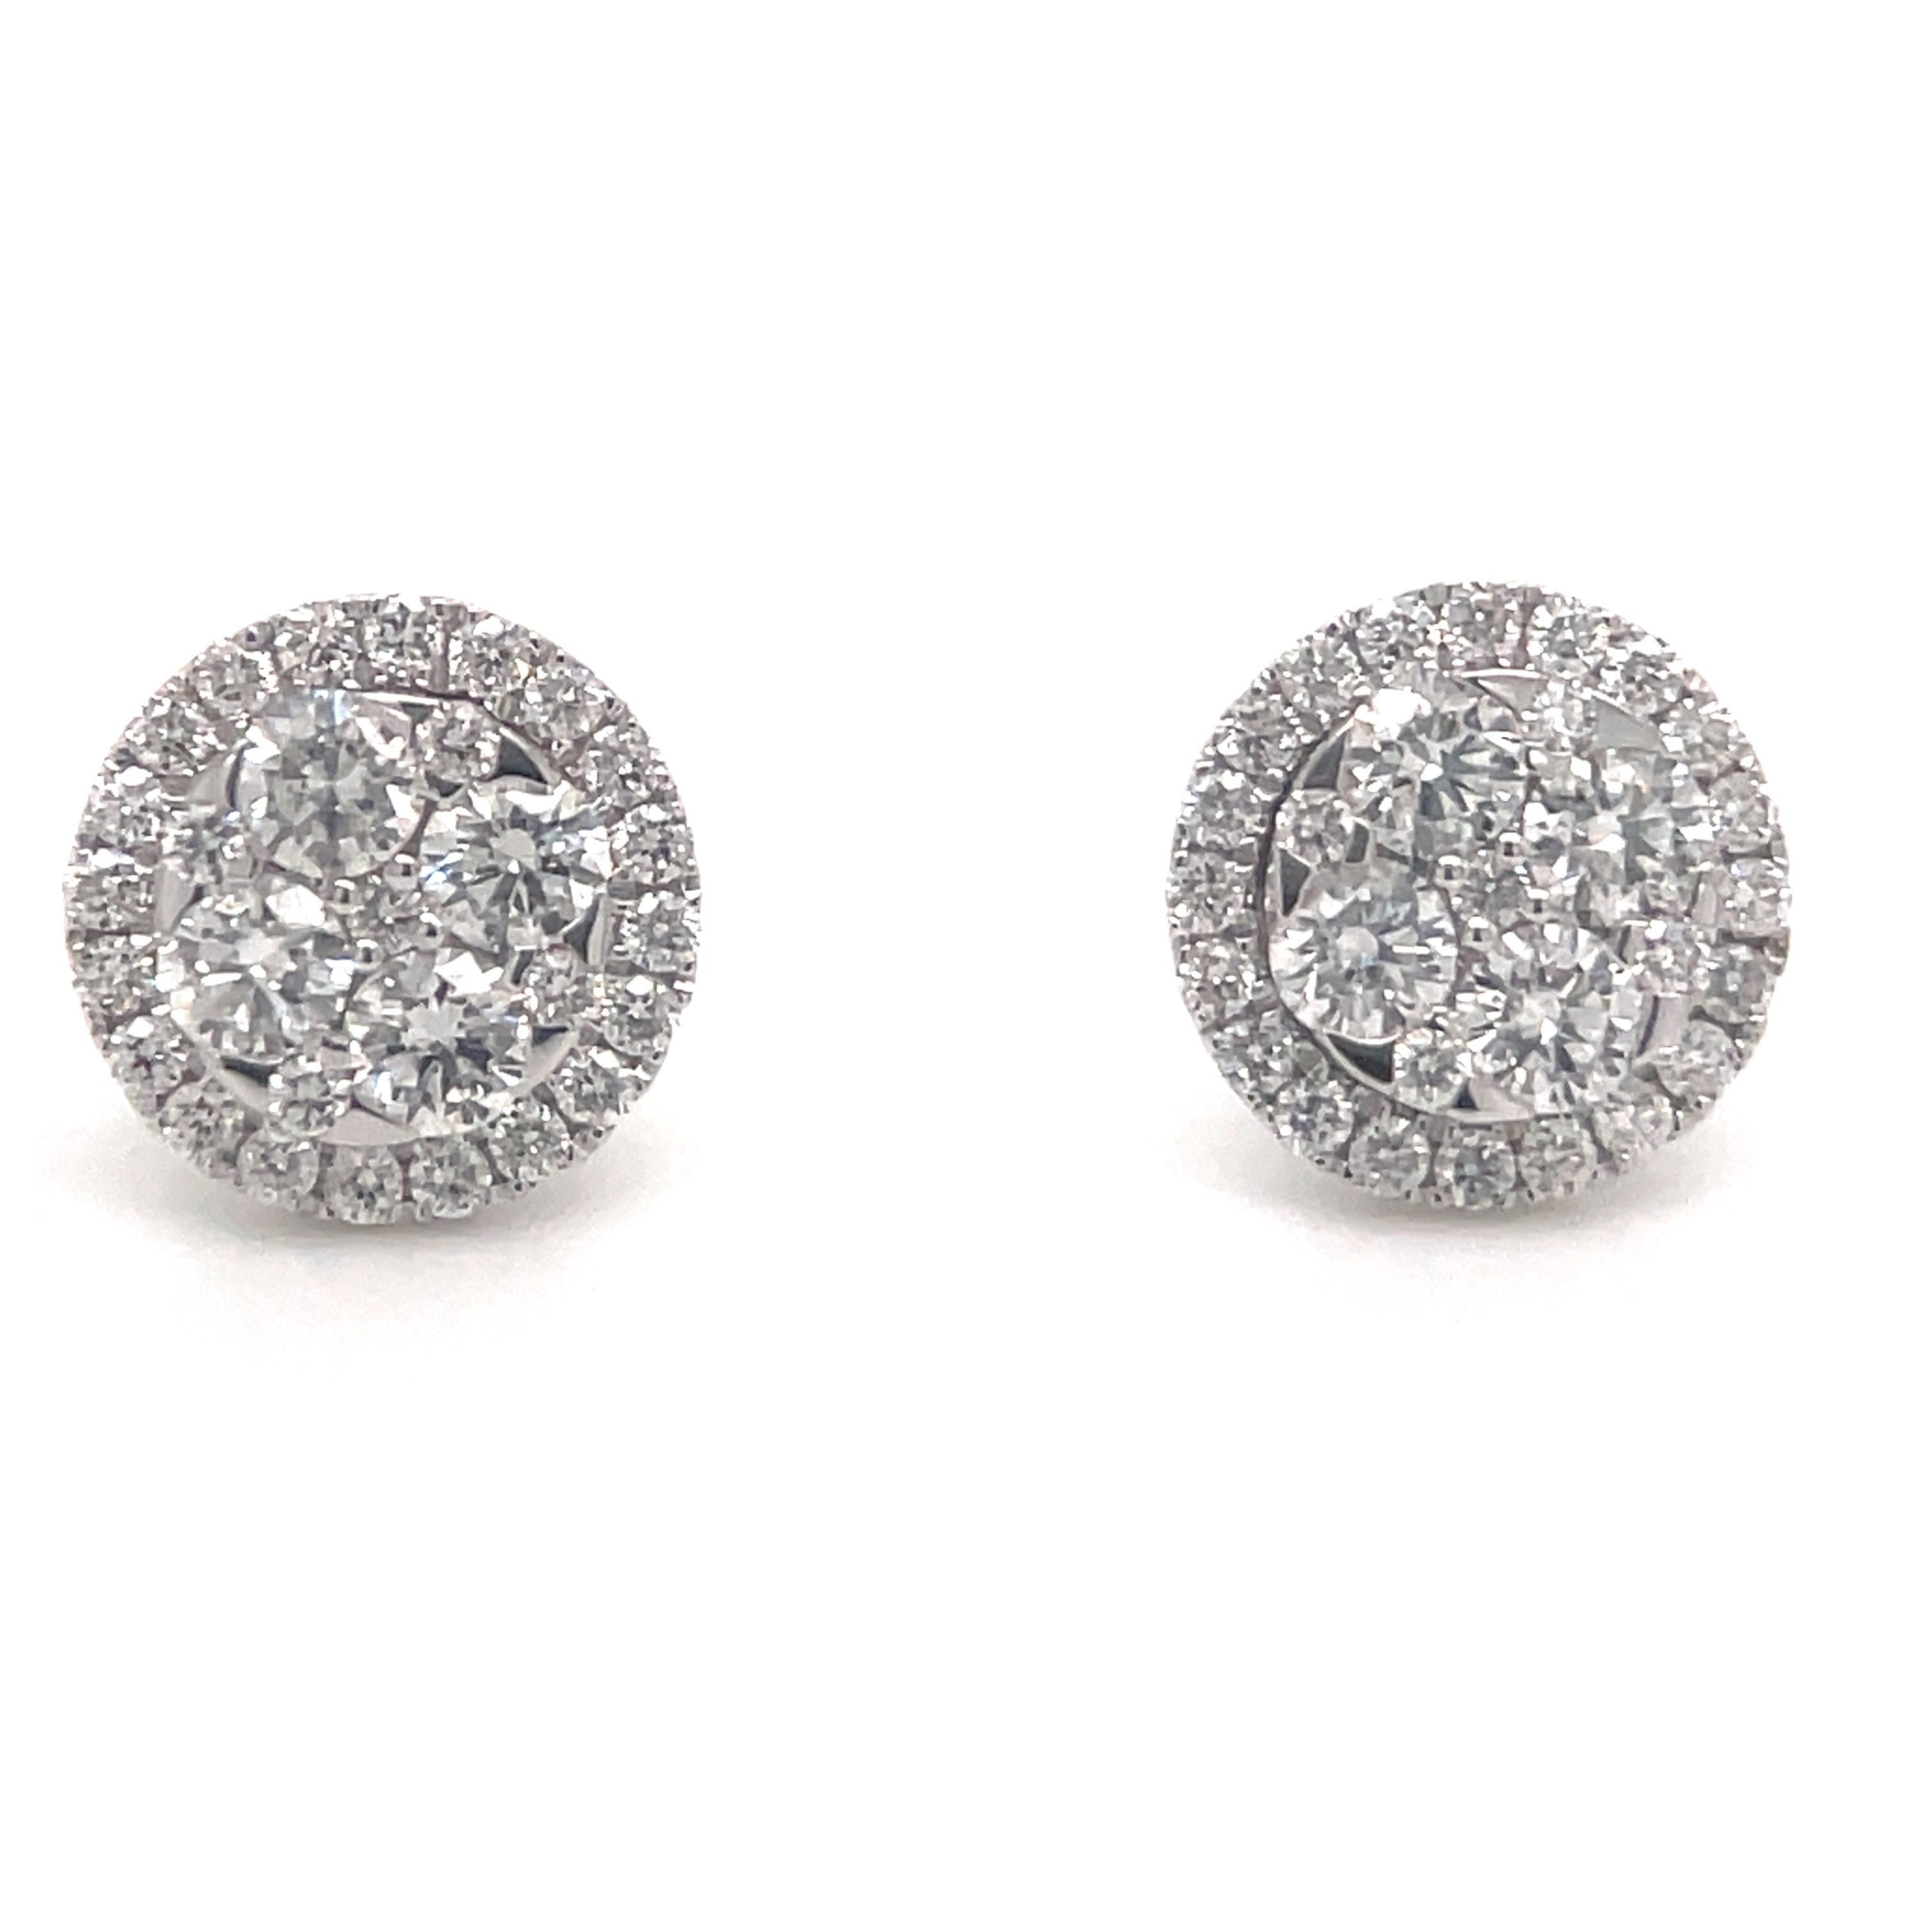 14 Karat White Gold diamond stud earrings featuring round brilliants weighing 0.58 carats and a diamond halo containing 50 diamonds weighing 0.31 carats.
Color G-H
Clarity SI